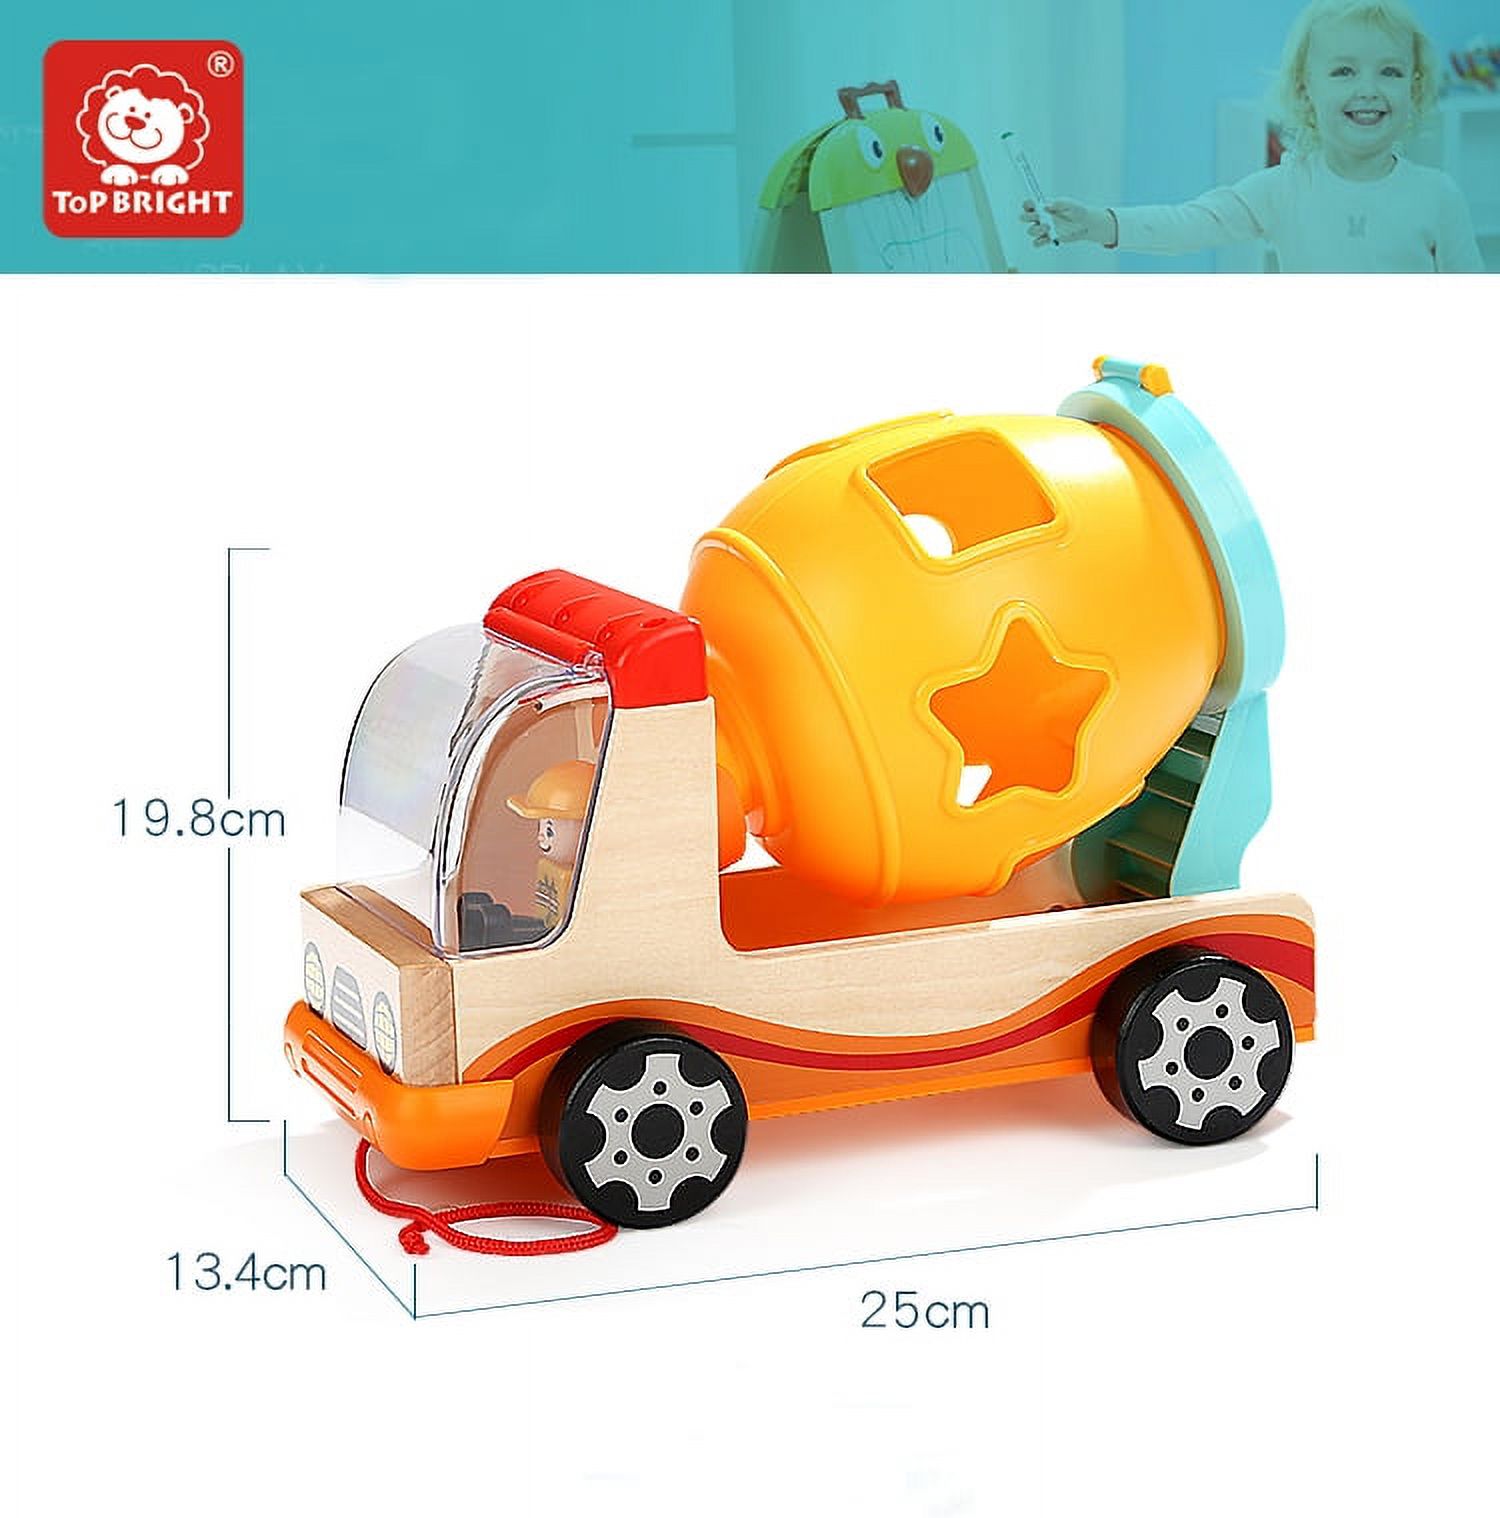 Top Bright - Mixer Truck with Shape Sorter for Toodlers Preschool Learning Toy - image 2 of 6